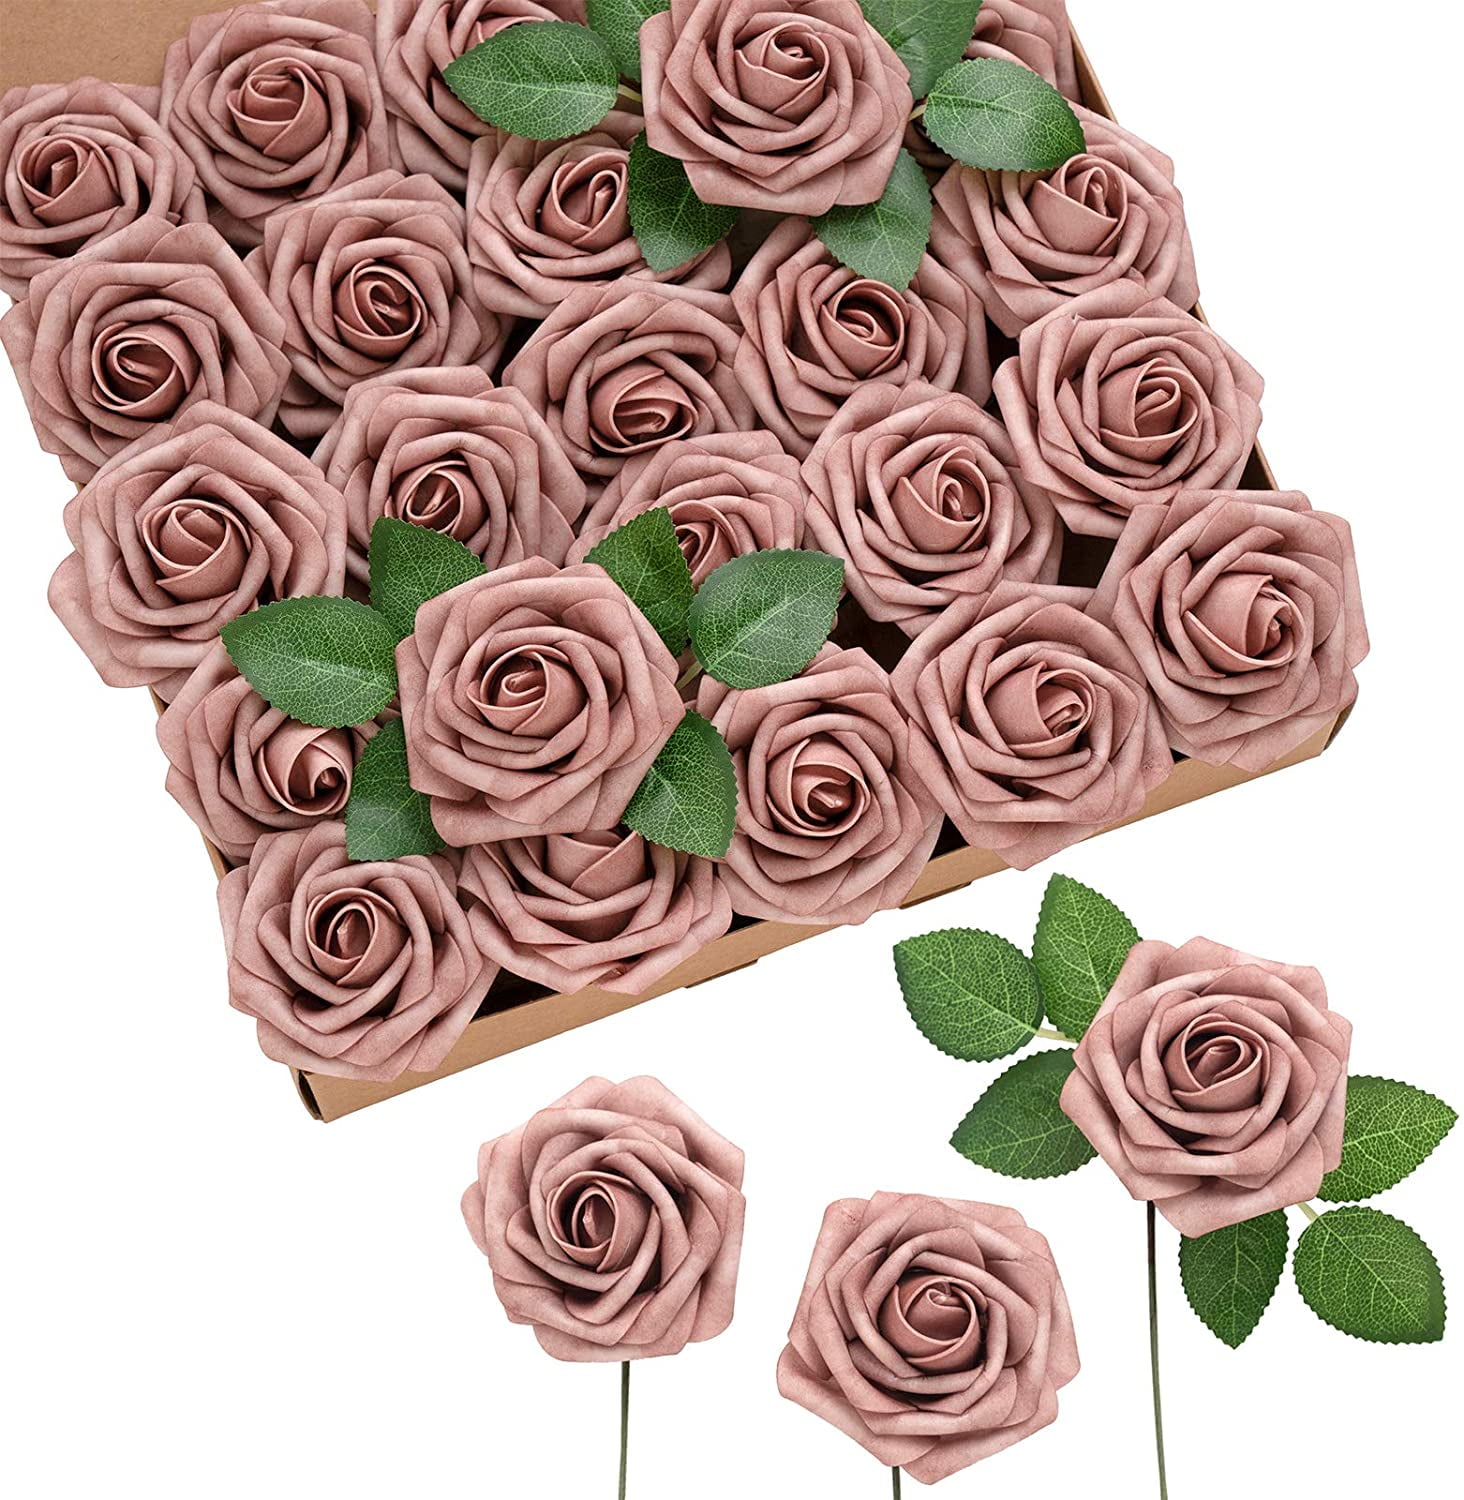 Ling's moment Roses Artificial Flowers 25pcs Realistic Mauve Roses with Stem for 